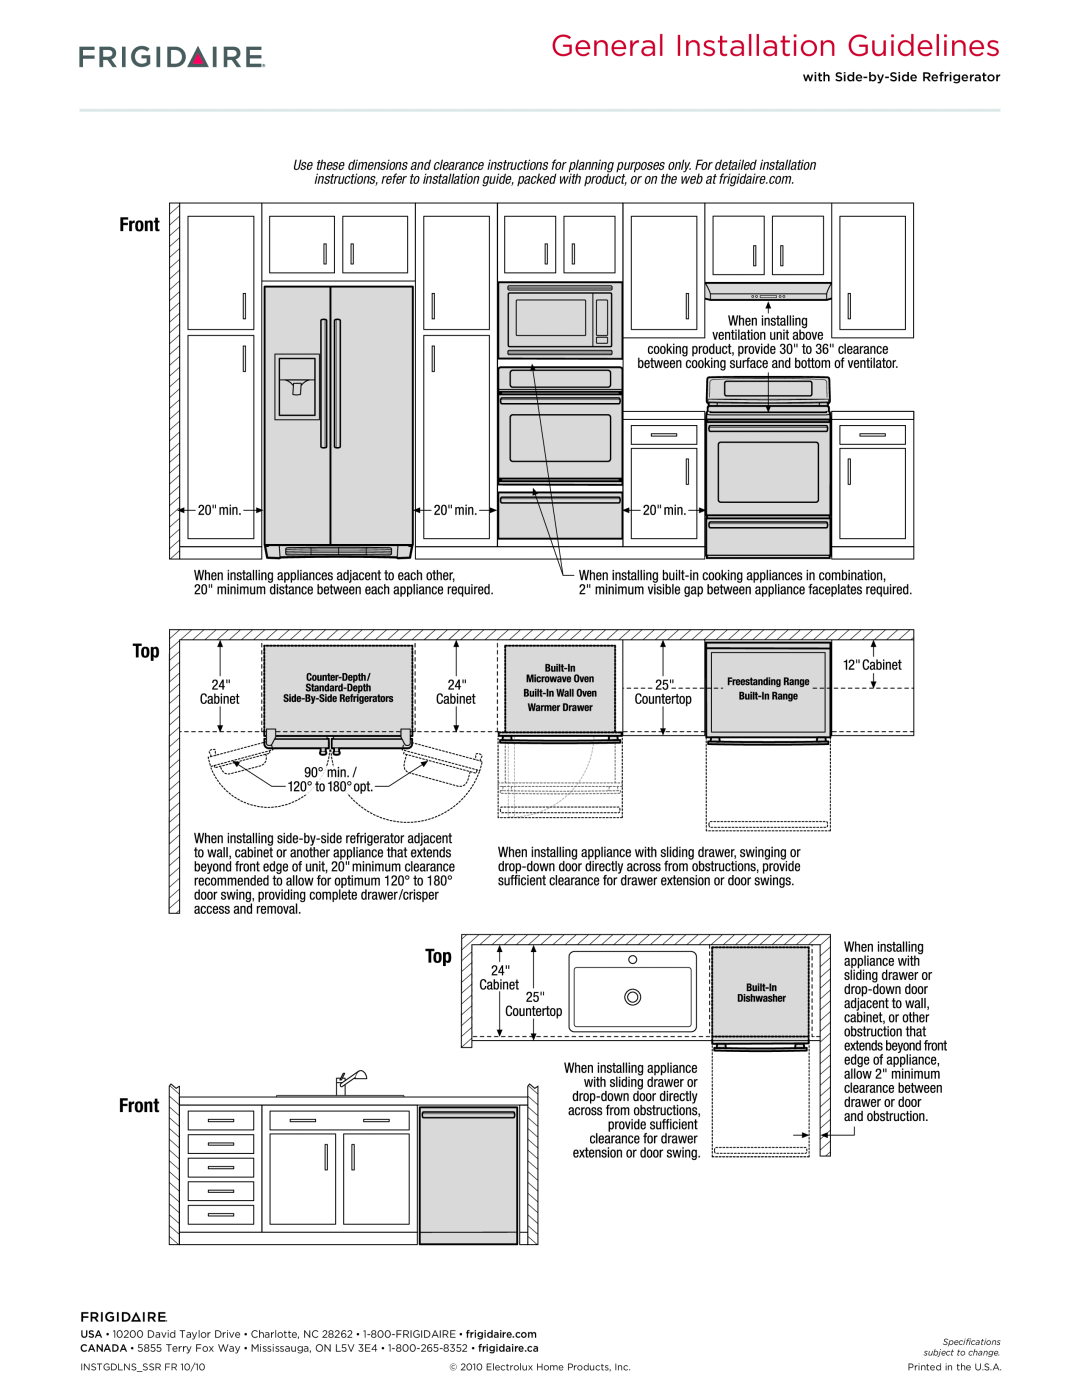 Frigidaire FPDS3085K F dimensions General Installation Guidelines, Top Front 